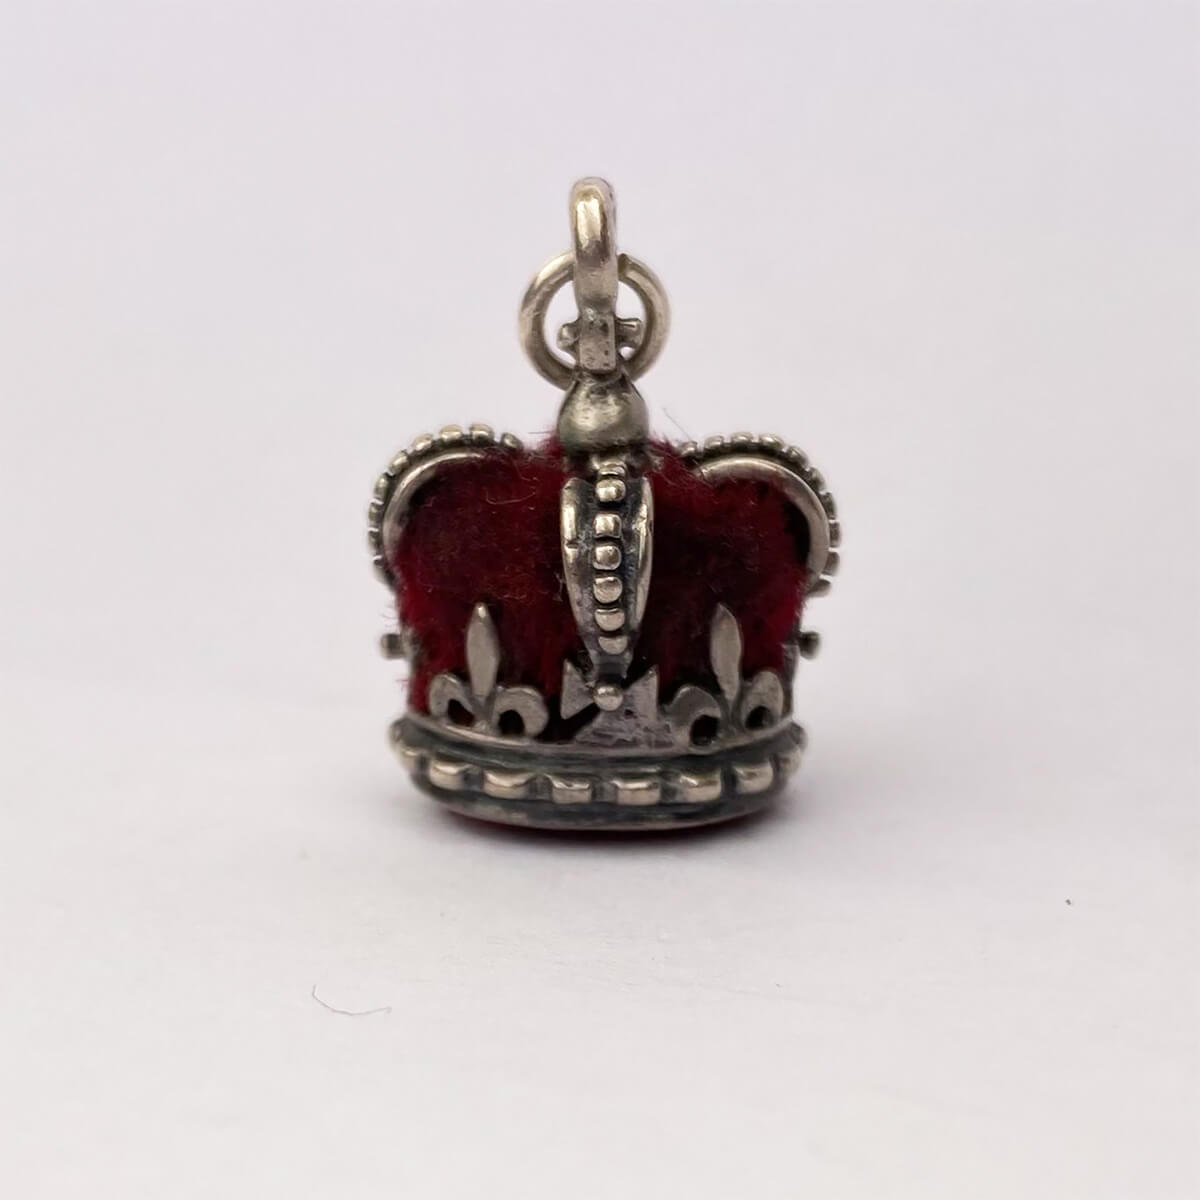 Vintage Beau royal crown charm with red velvet fabric